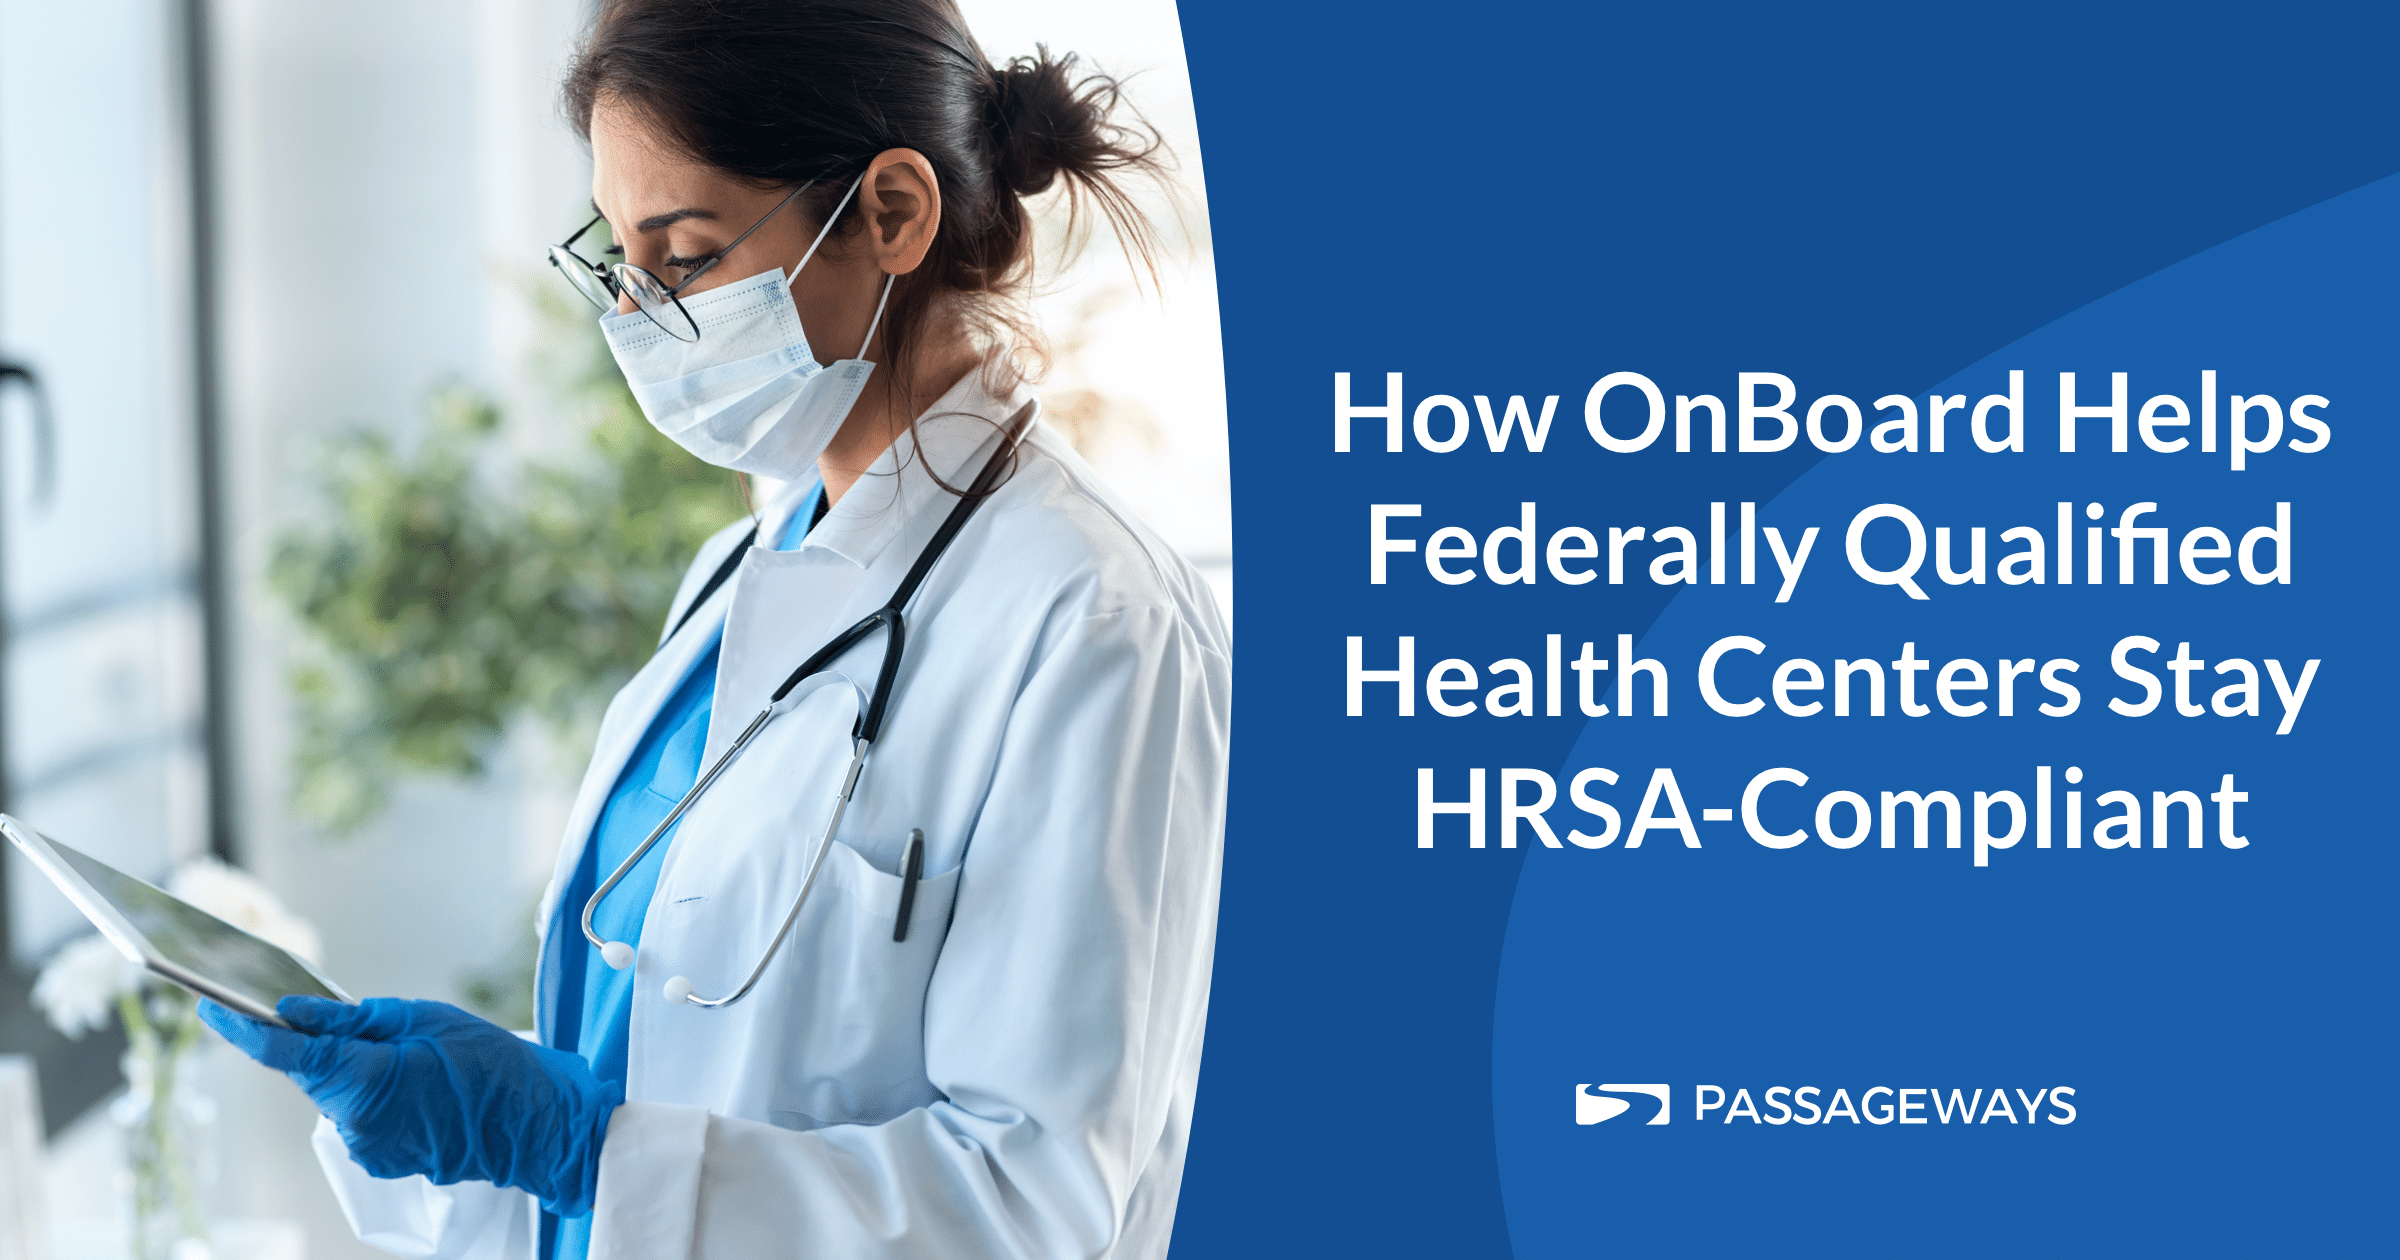 How OnBoard Helps Federally Qualified Health Centers Stay